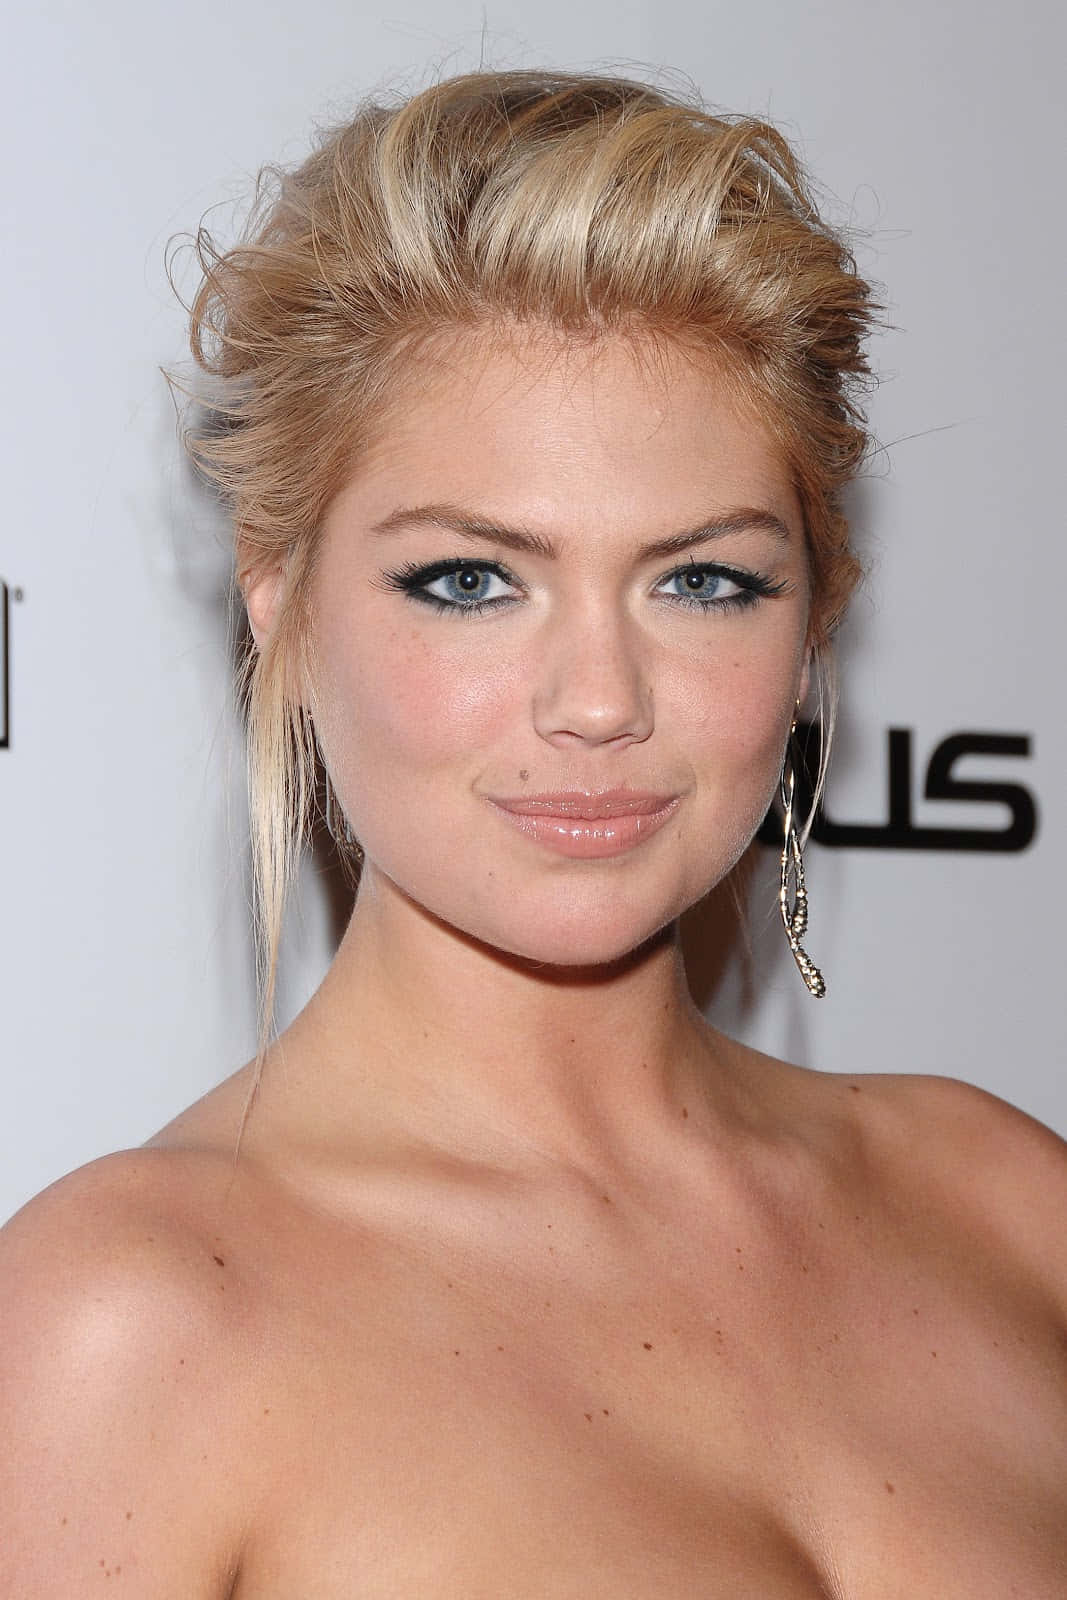 Model, Actress, And Sports Illustrated Swimsuit Cover Girl Kate Upton